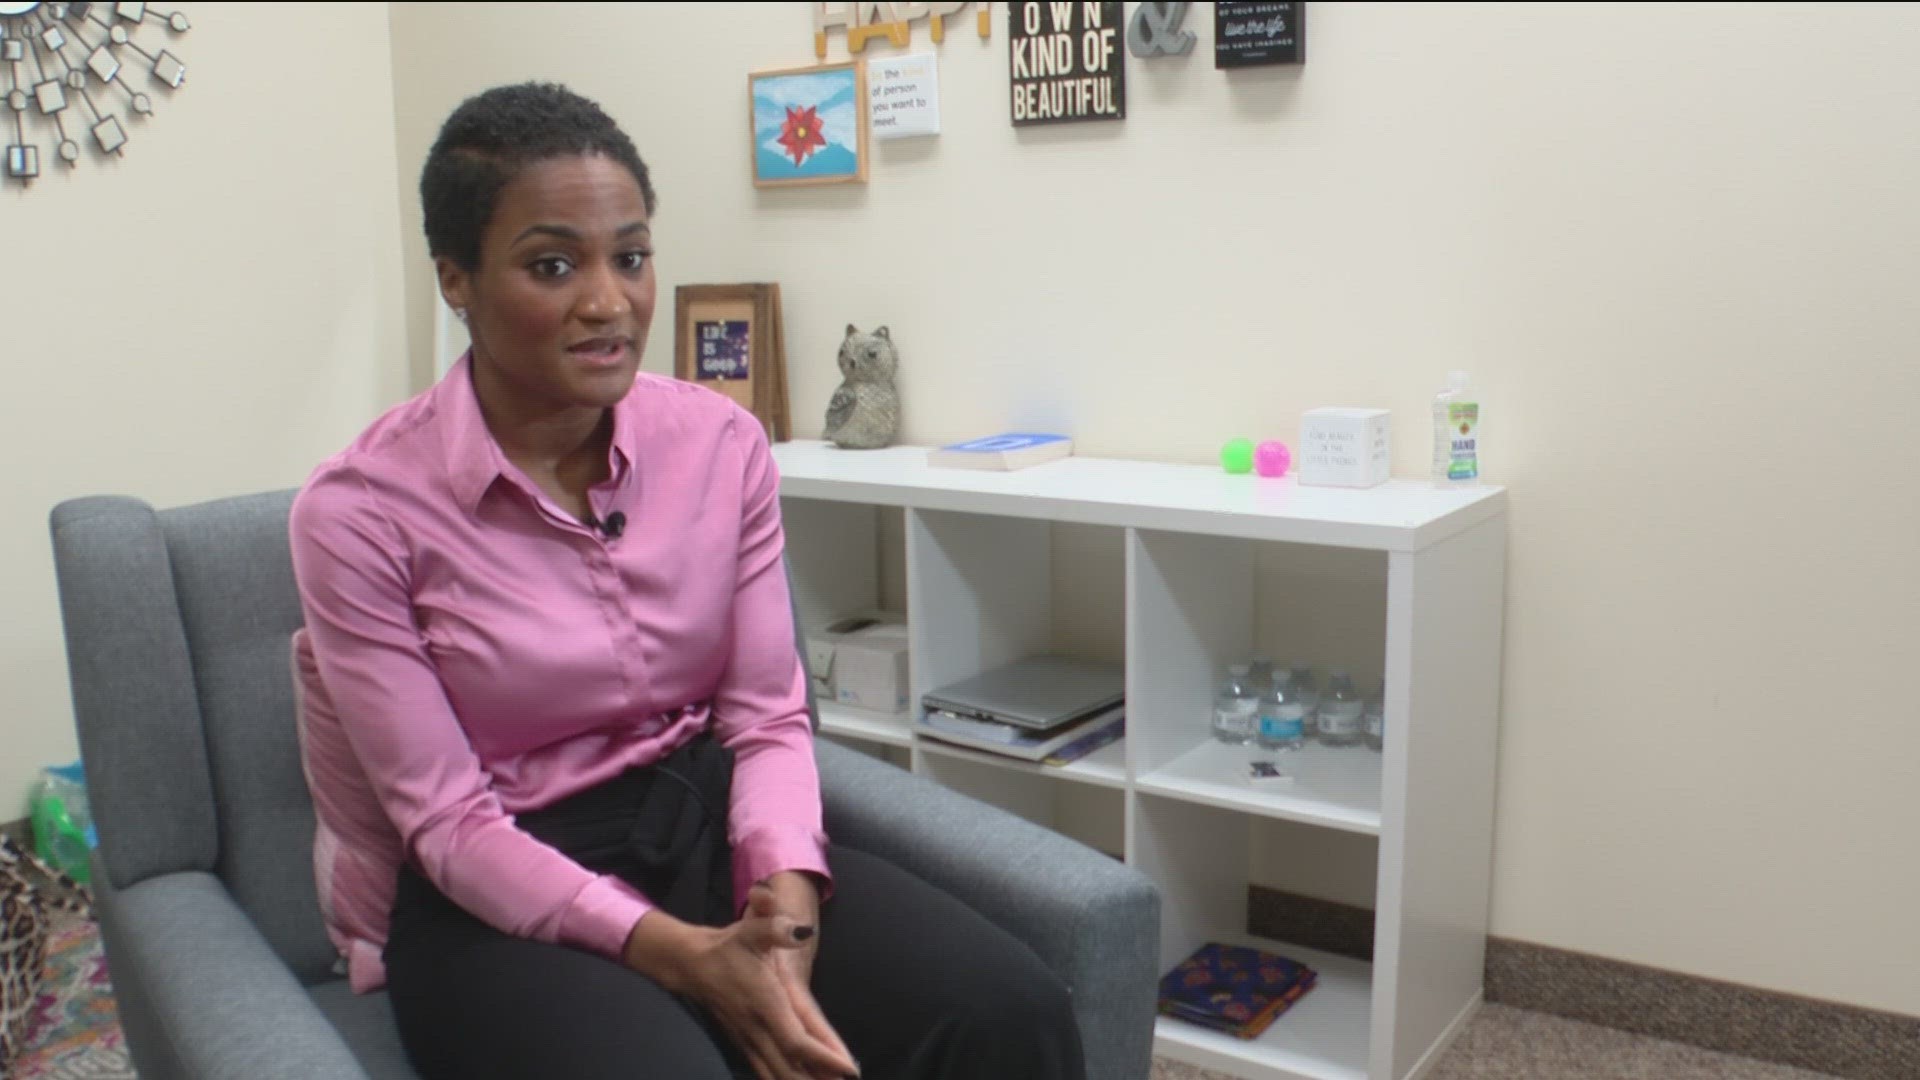 Ebony Eromobor, owner of Village Support Therapy, said that it is important to train more Black mental health professionals in the field.